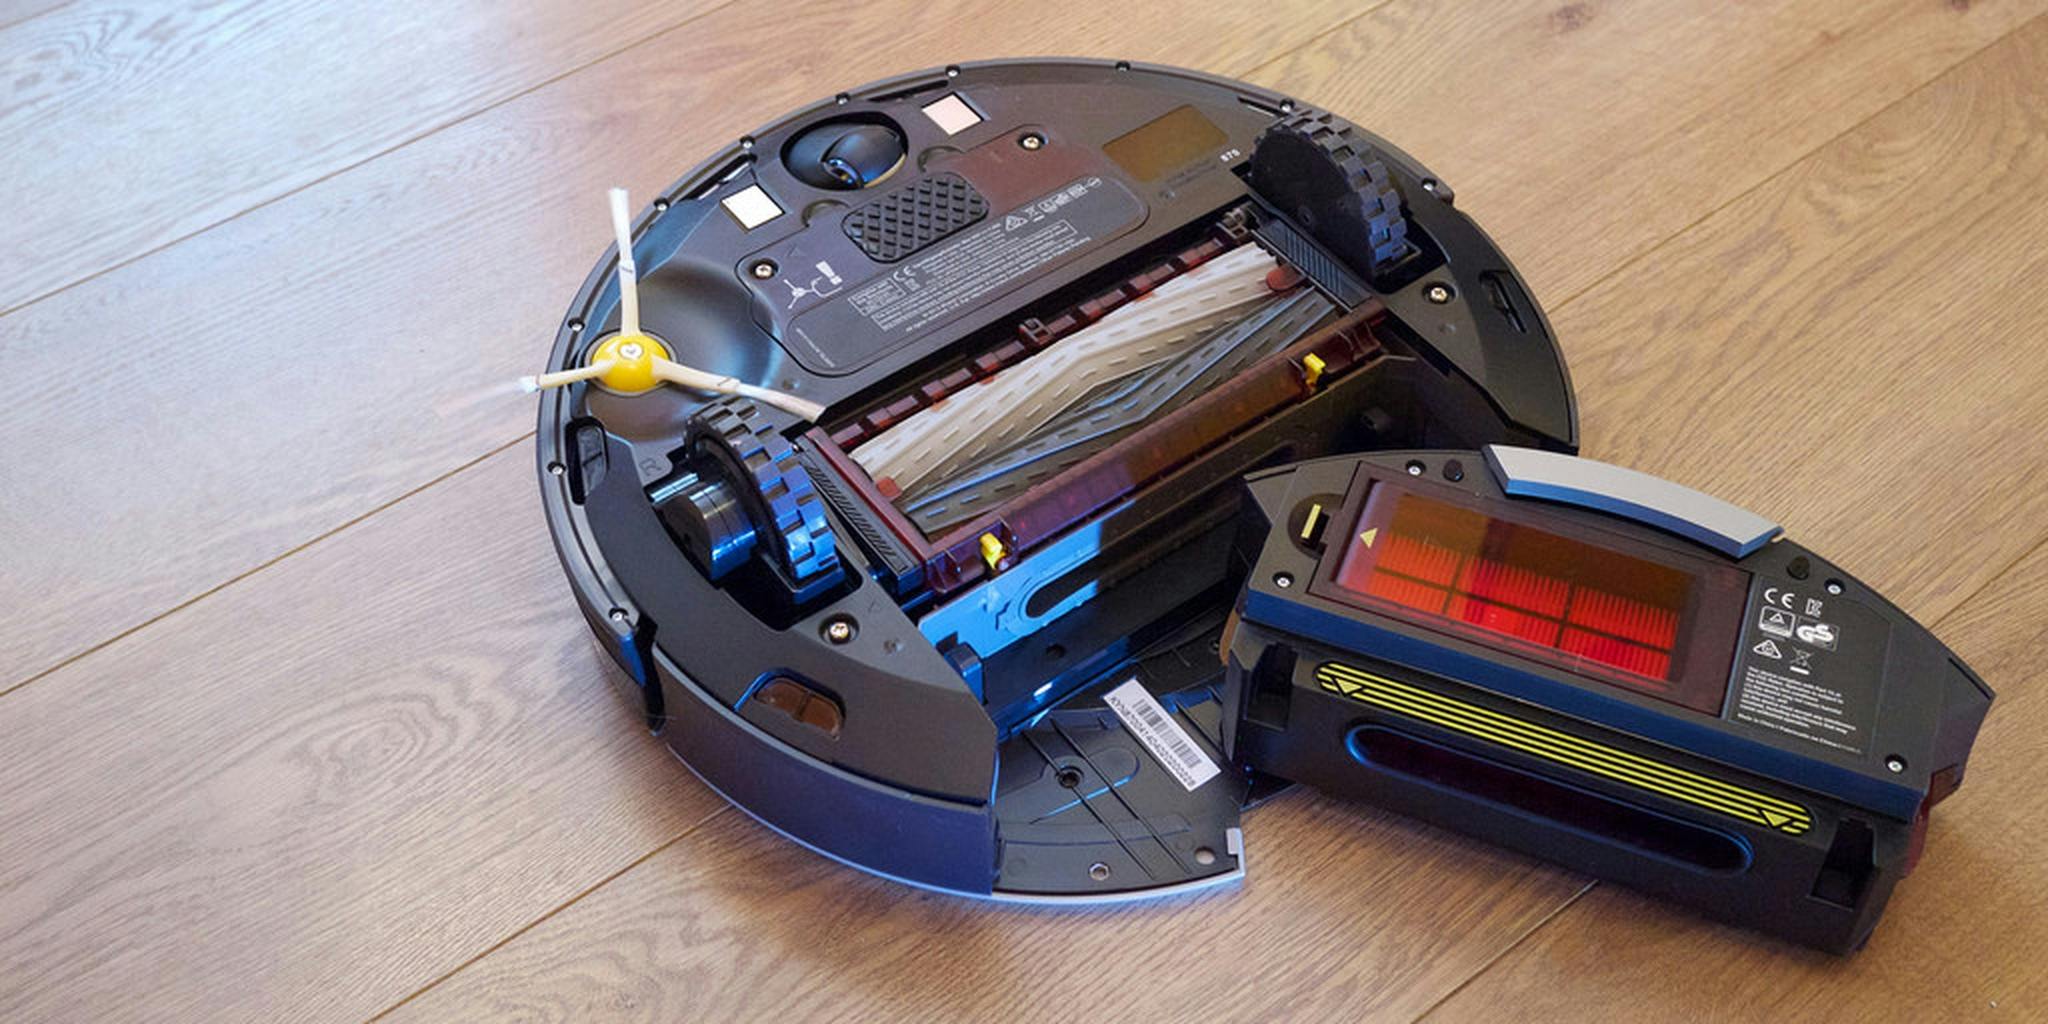 Økonomi episode Observere How the Roomba sparked a hacking revolution - The Daily Dot